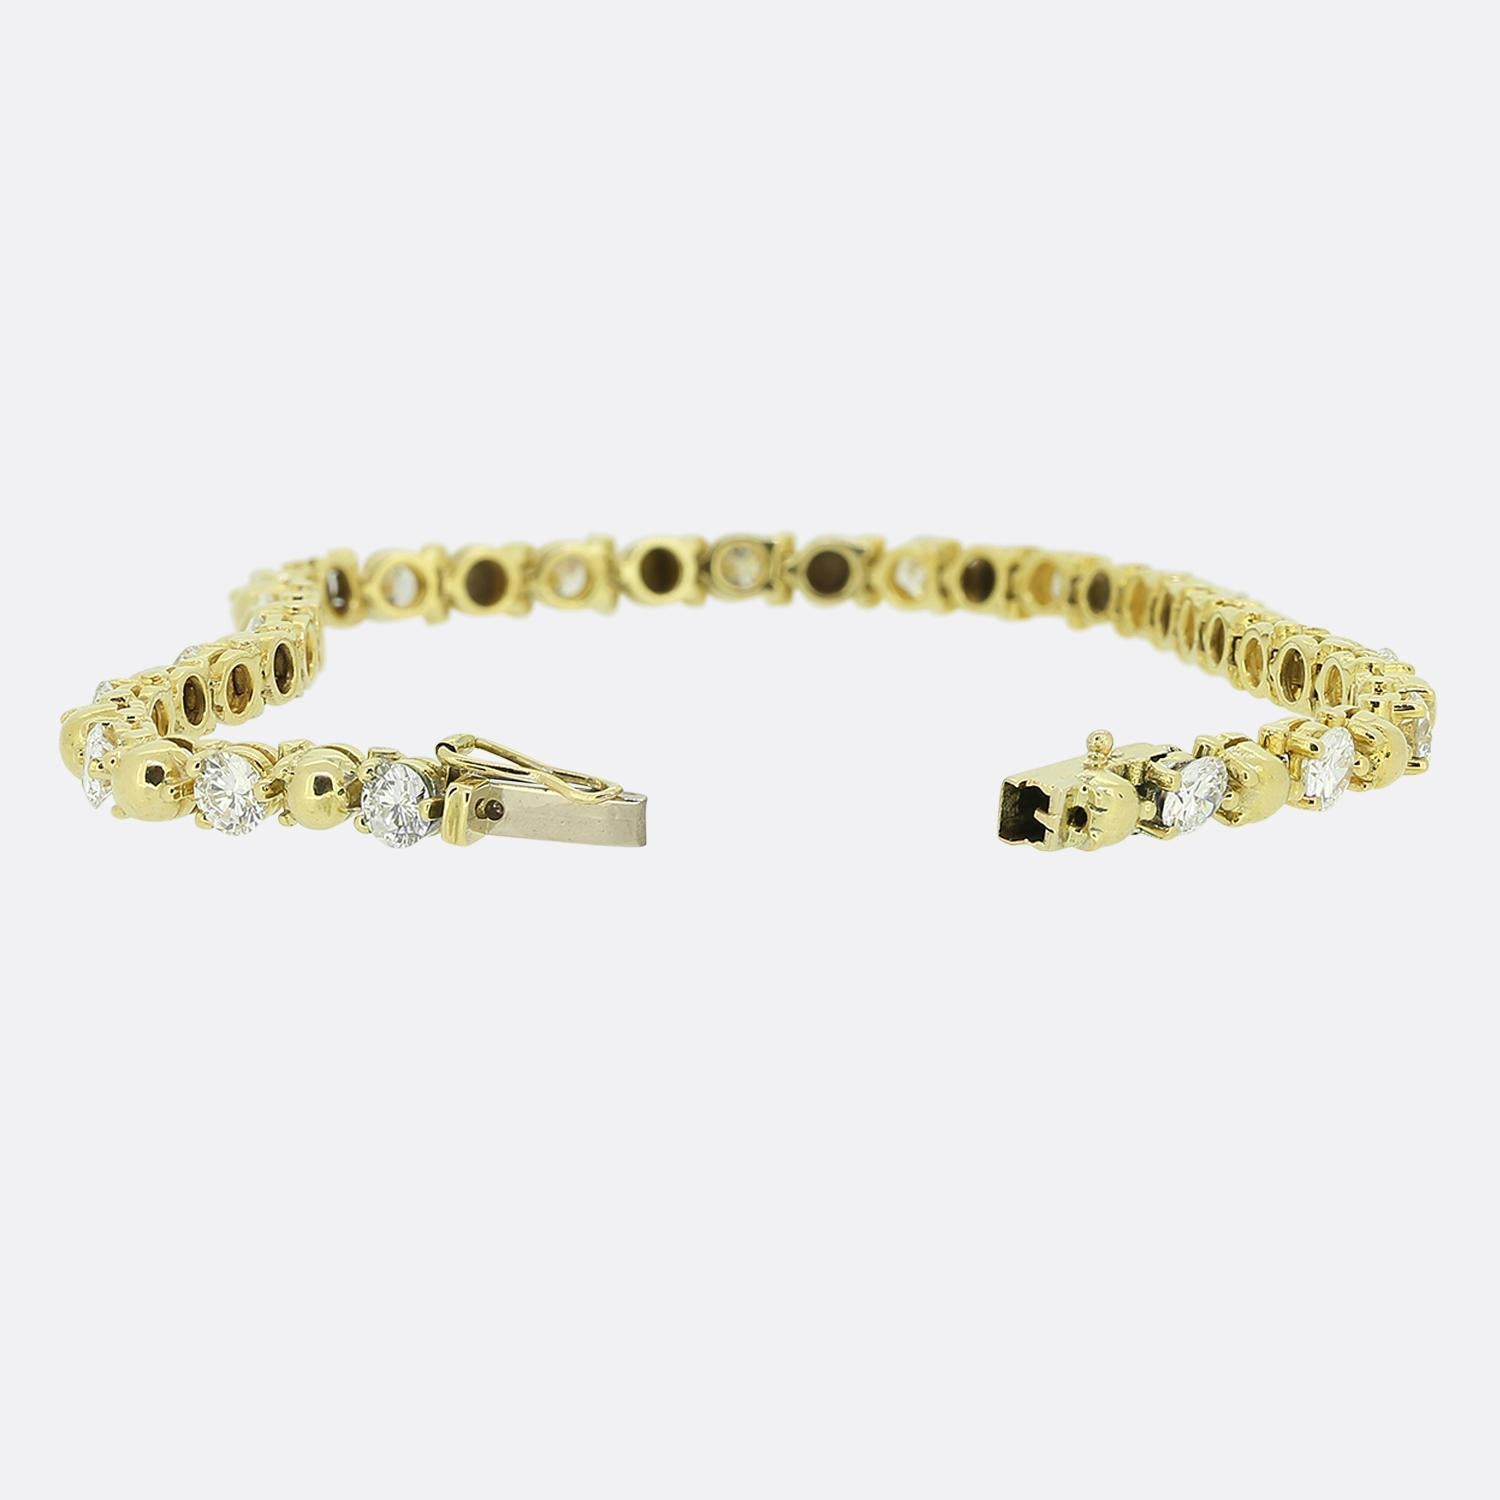 Here we have a cheerful and bright, dazzling diamond tennis bracelet. This elegant piece has been perfectly handcrafted from 18ct yellow gold and showcases an alternating array of polished gold spheres and round brilliant cut diamonds. 

Condition: